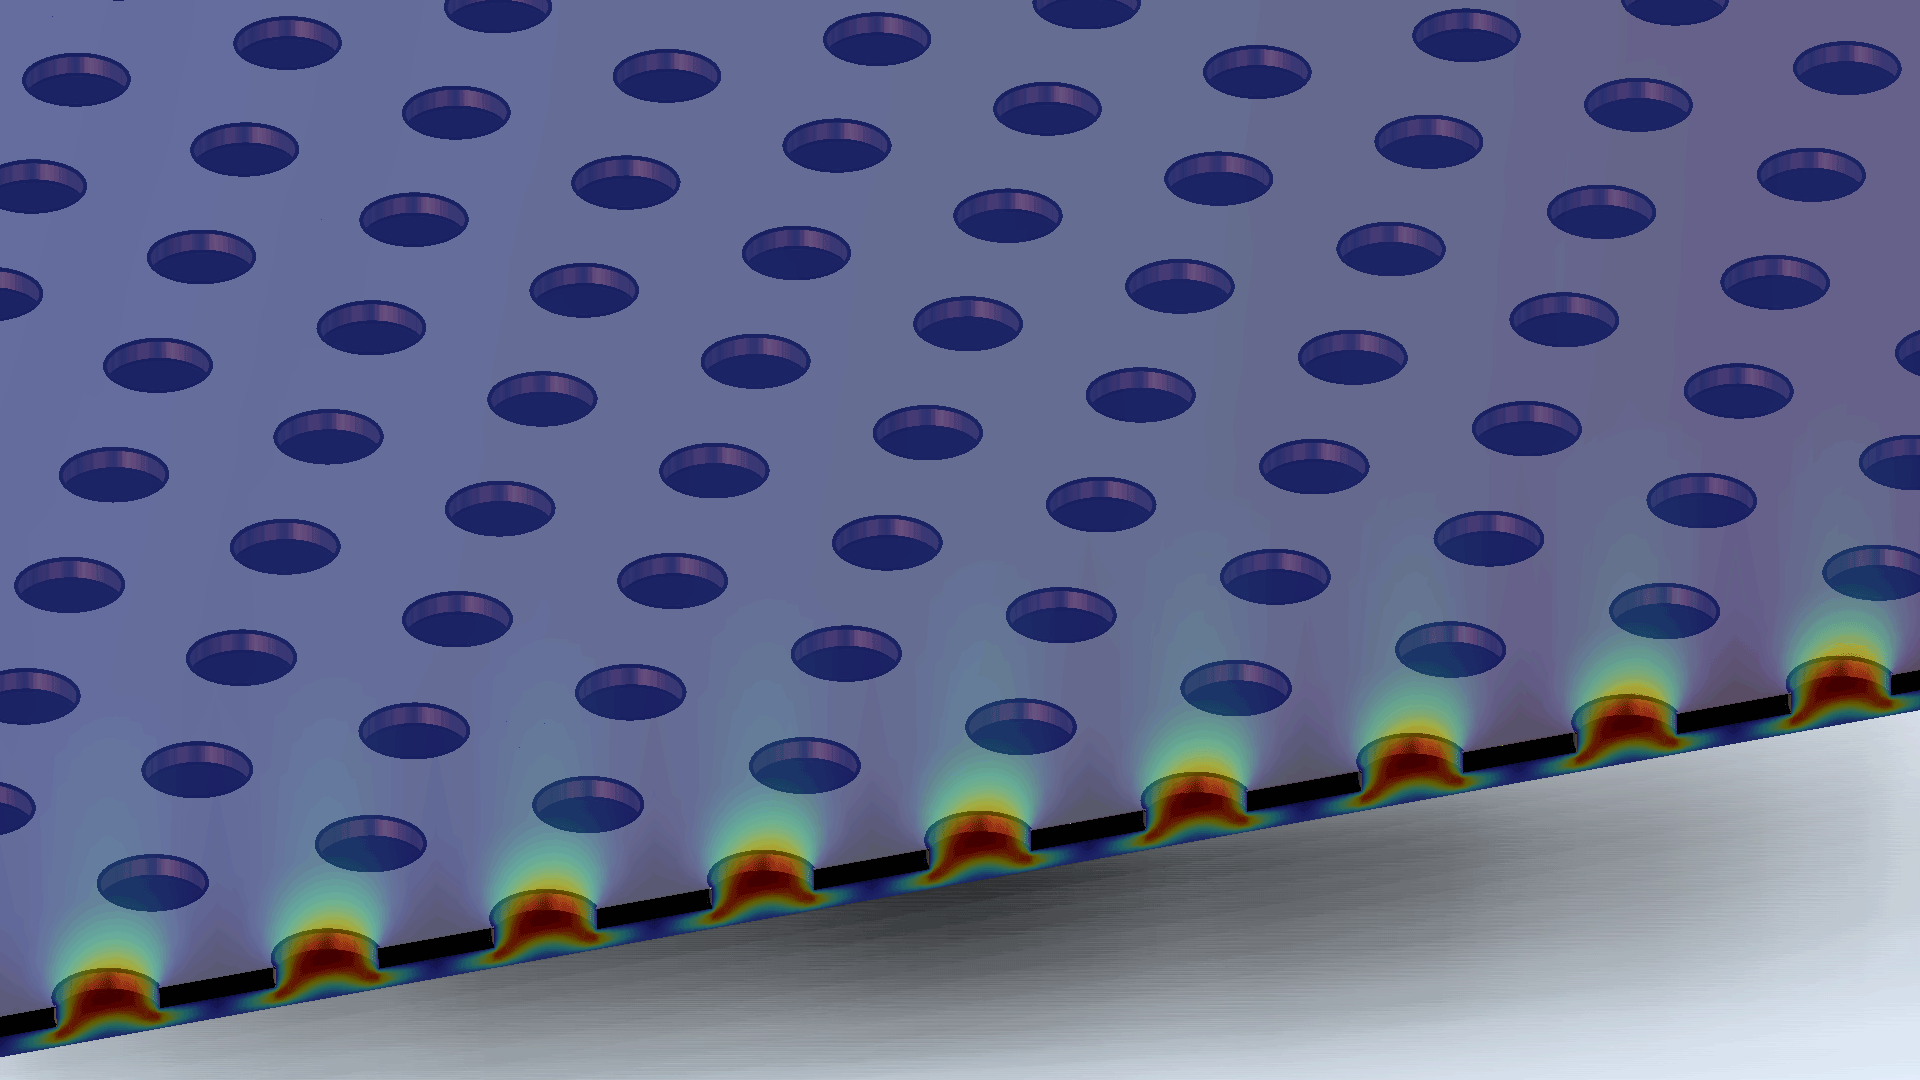 A microperforated plate model showing the optimal hole size for perforation in the Rainbow color table.